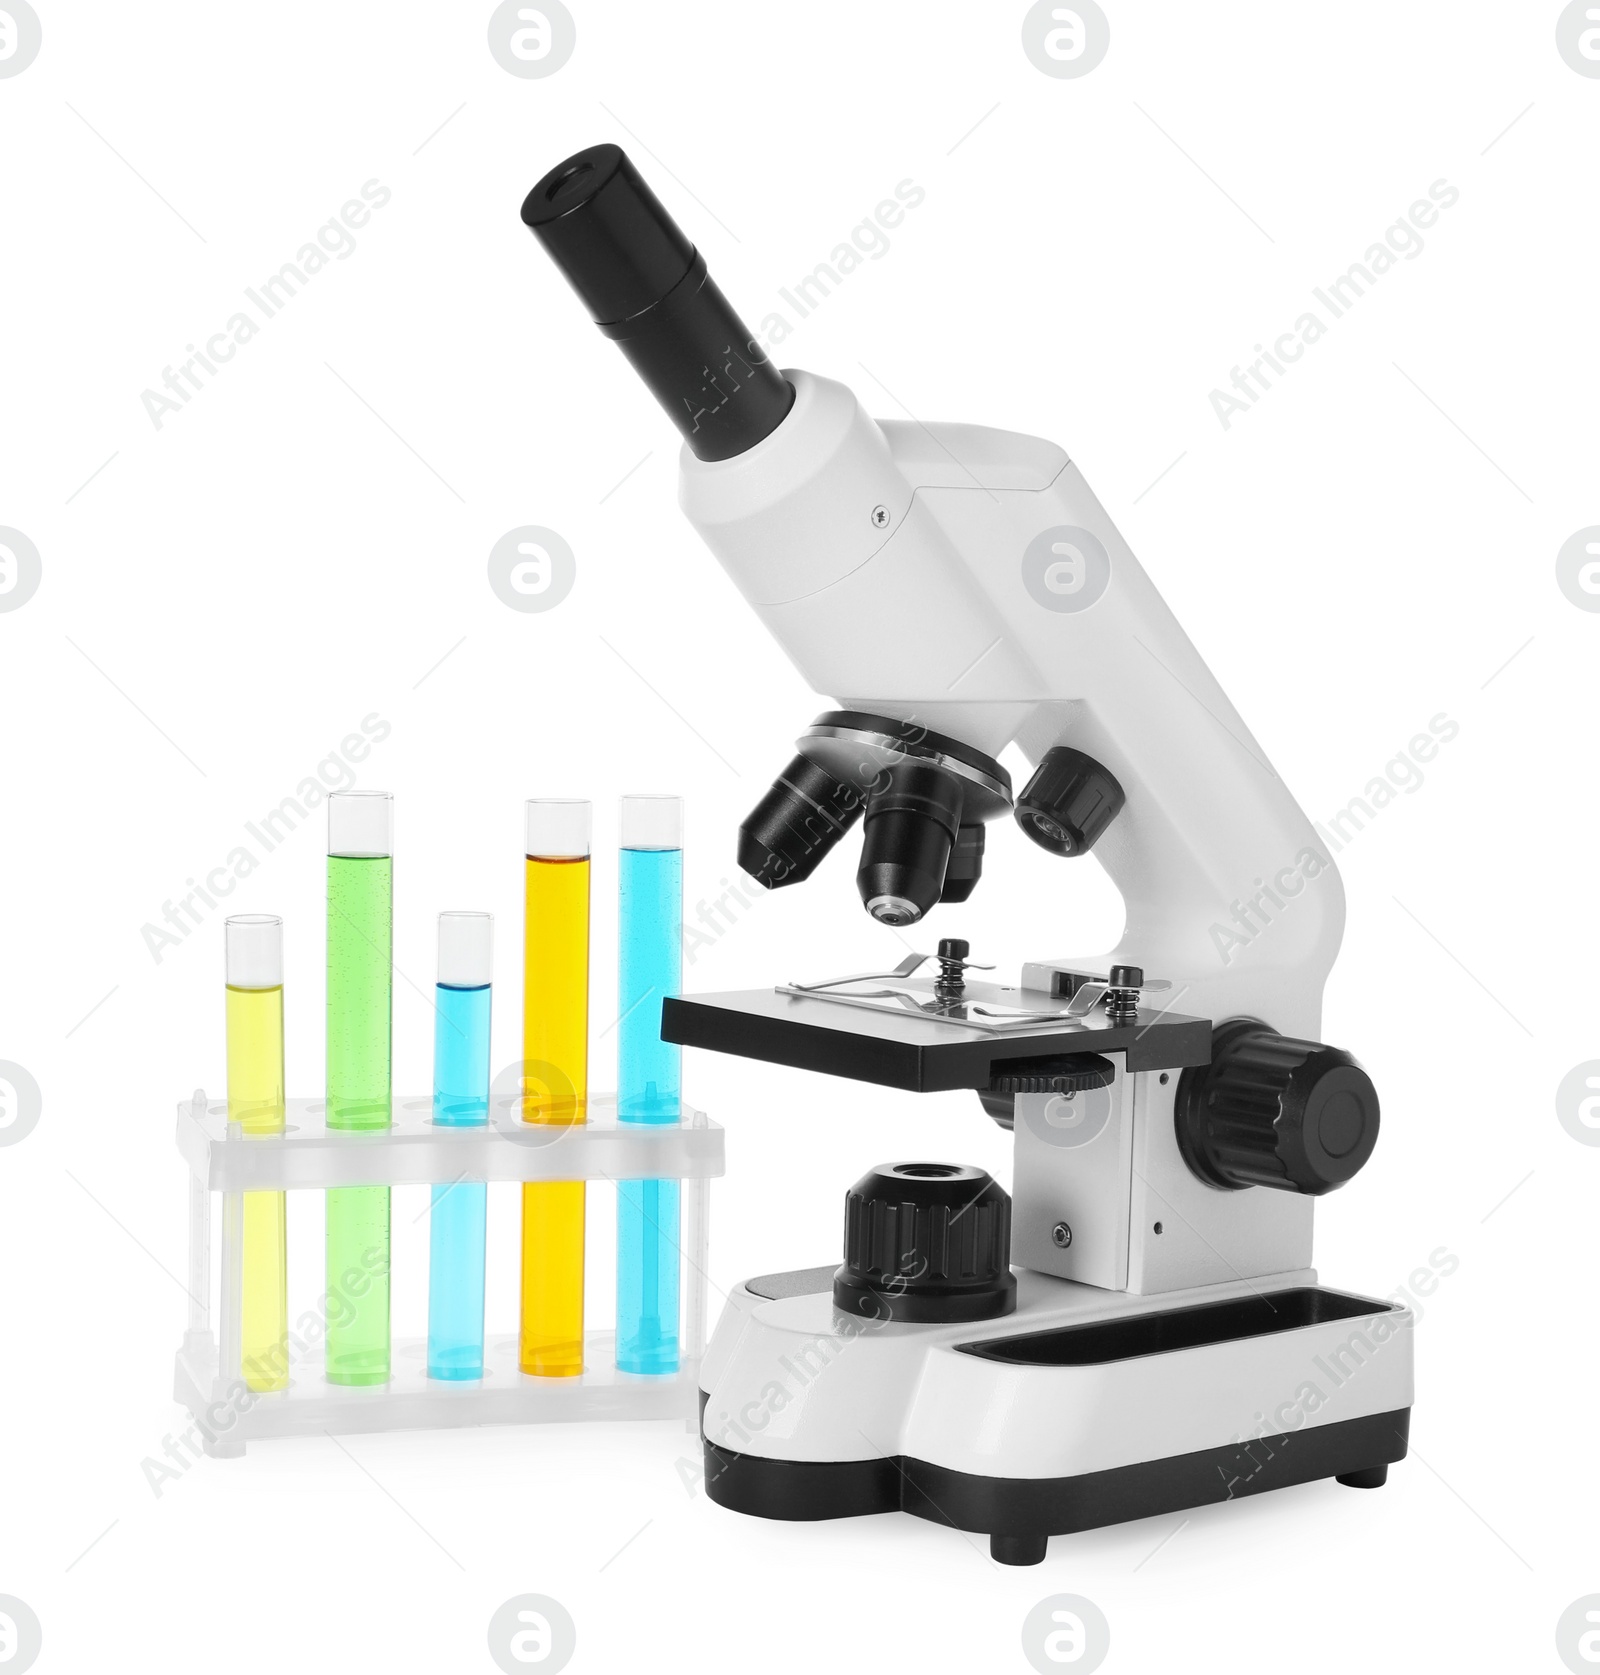 Photo of Test tubes with colorful liquids and microscope isolated on white